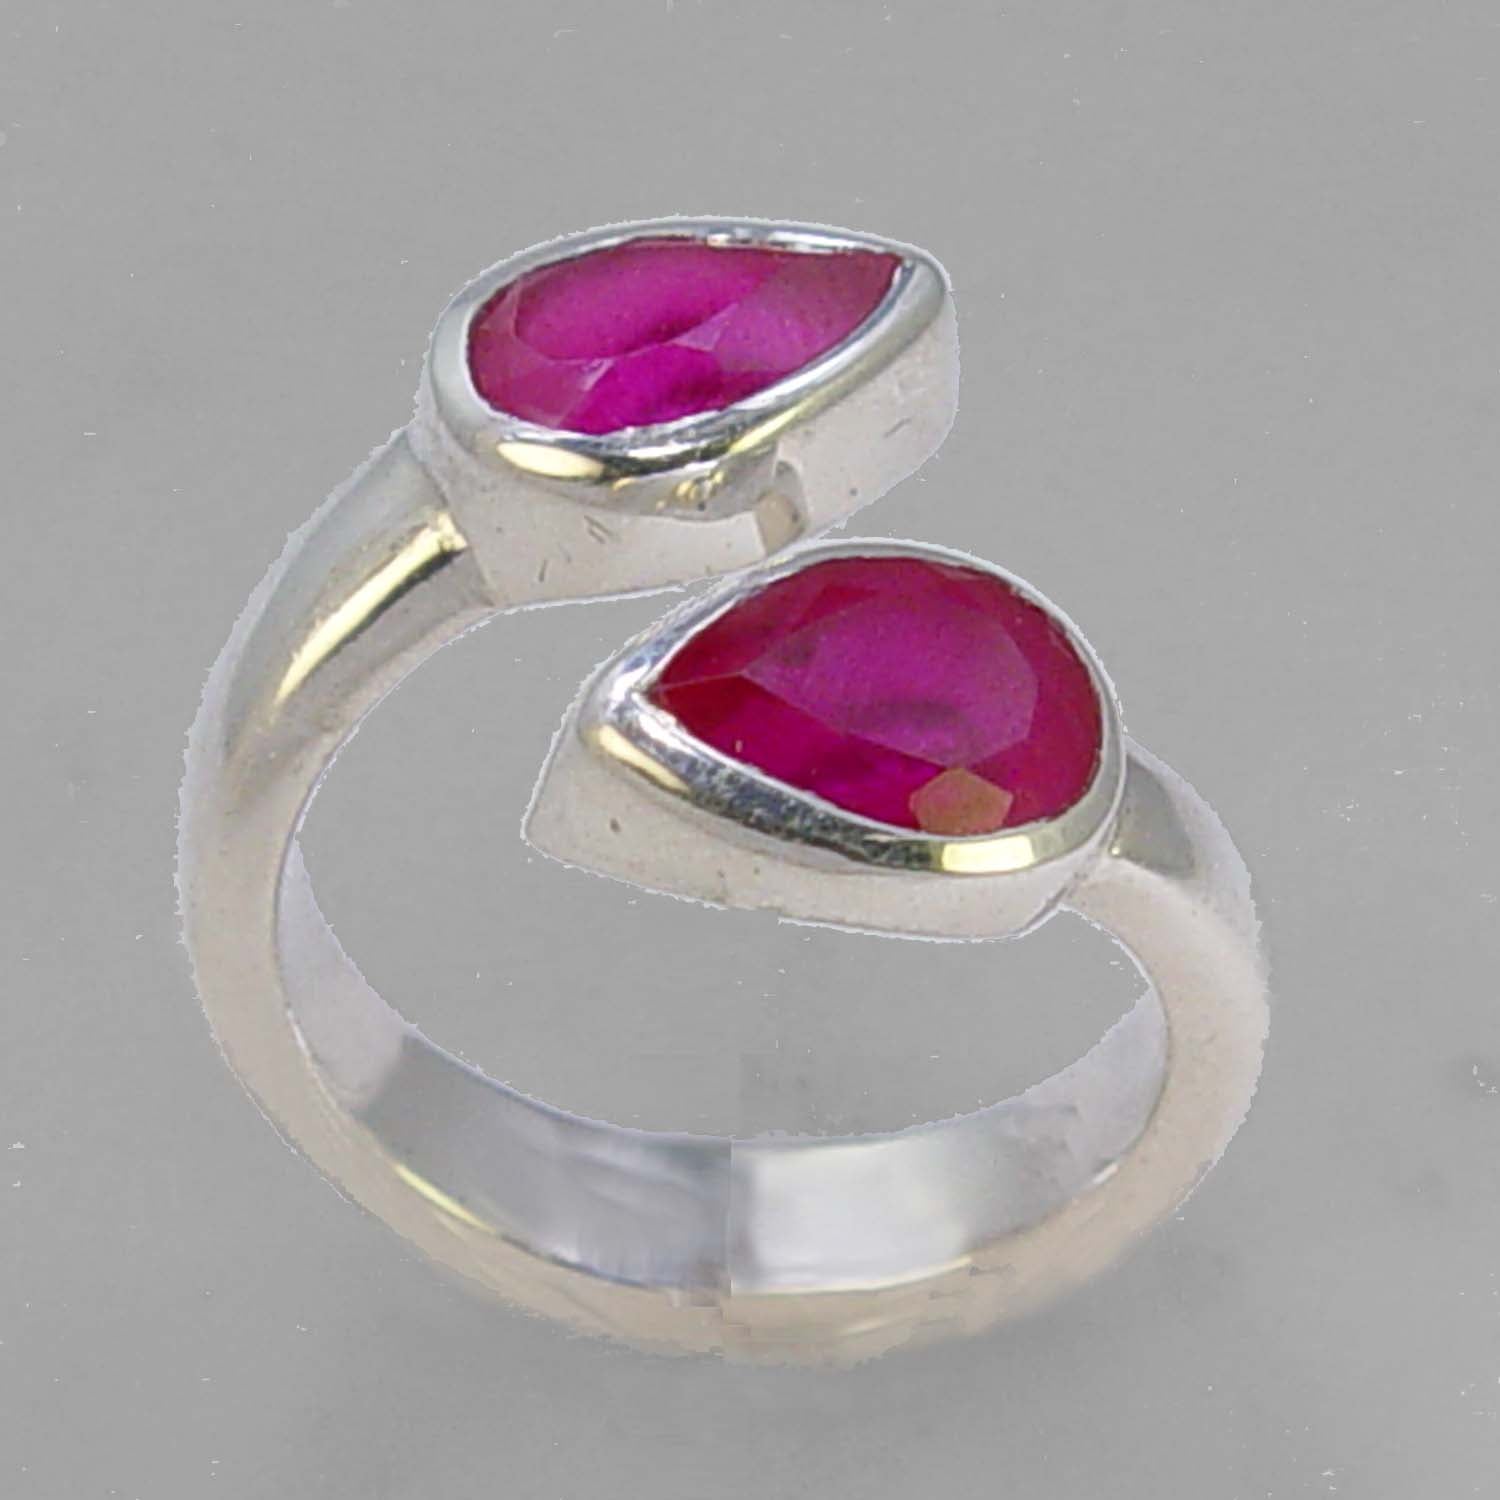 Ruby 3 ctw Faceted Pear Cut Sterling Silver Ring, Size 7, Adjustable